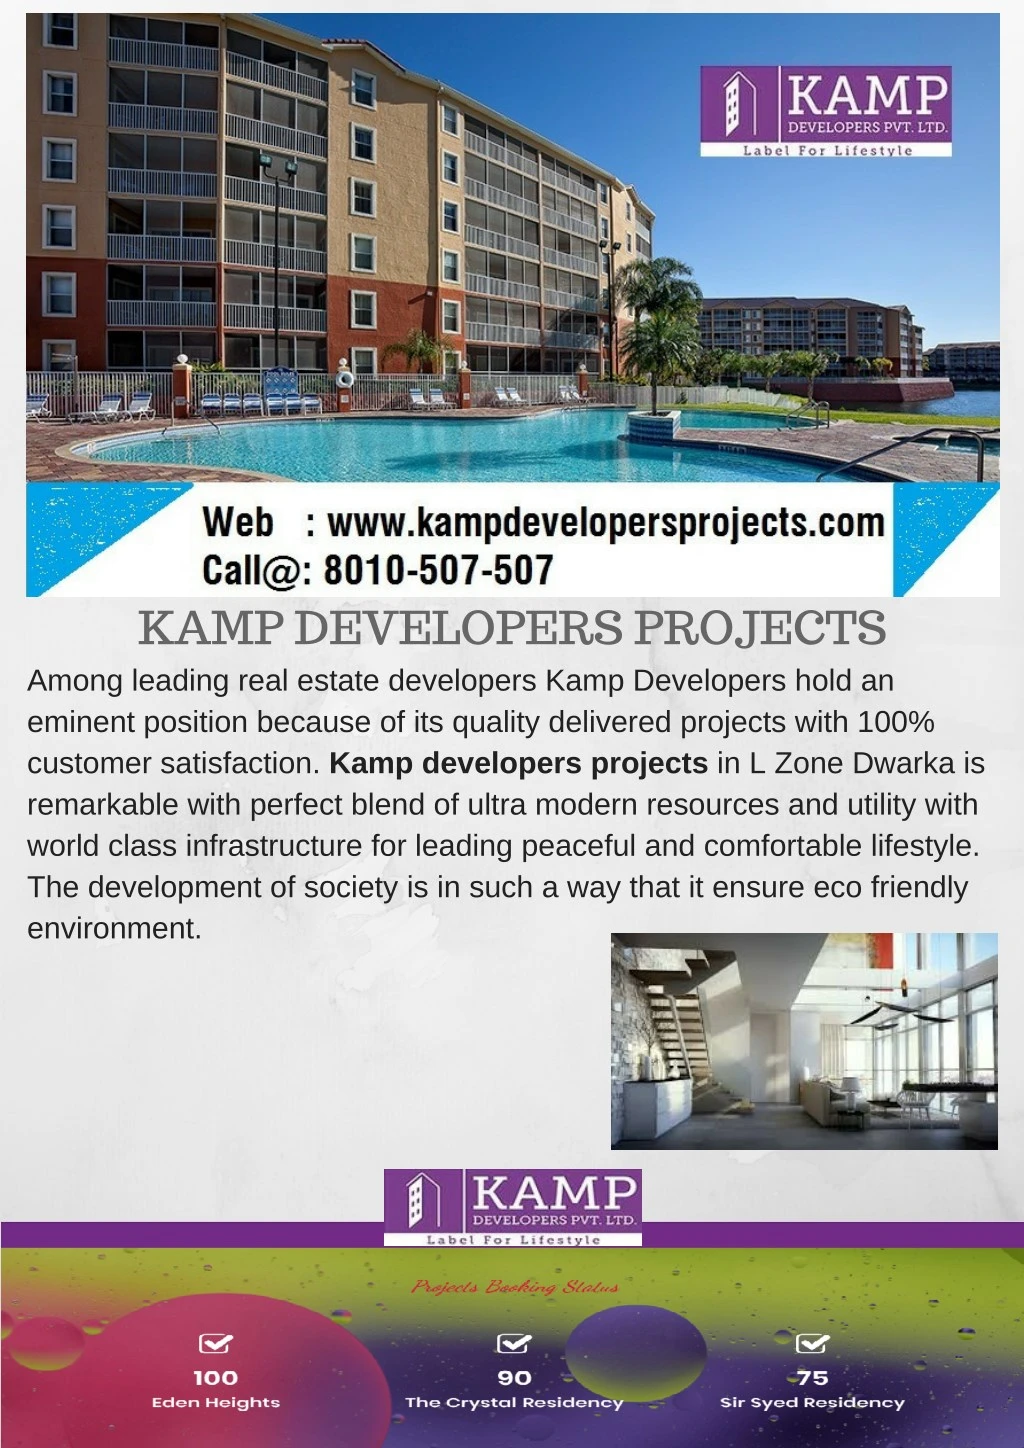 kamp developers projects among leading real